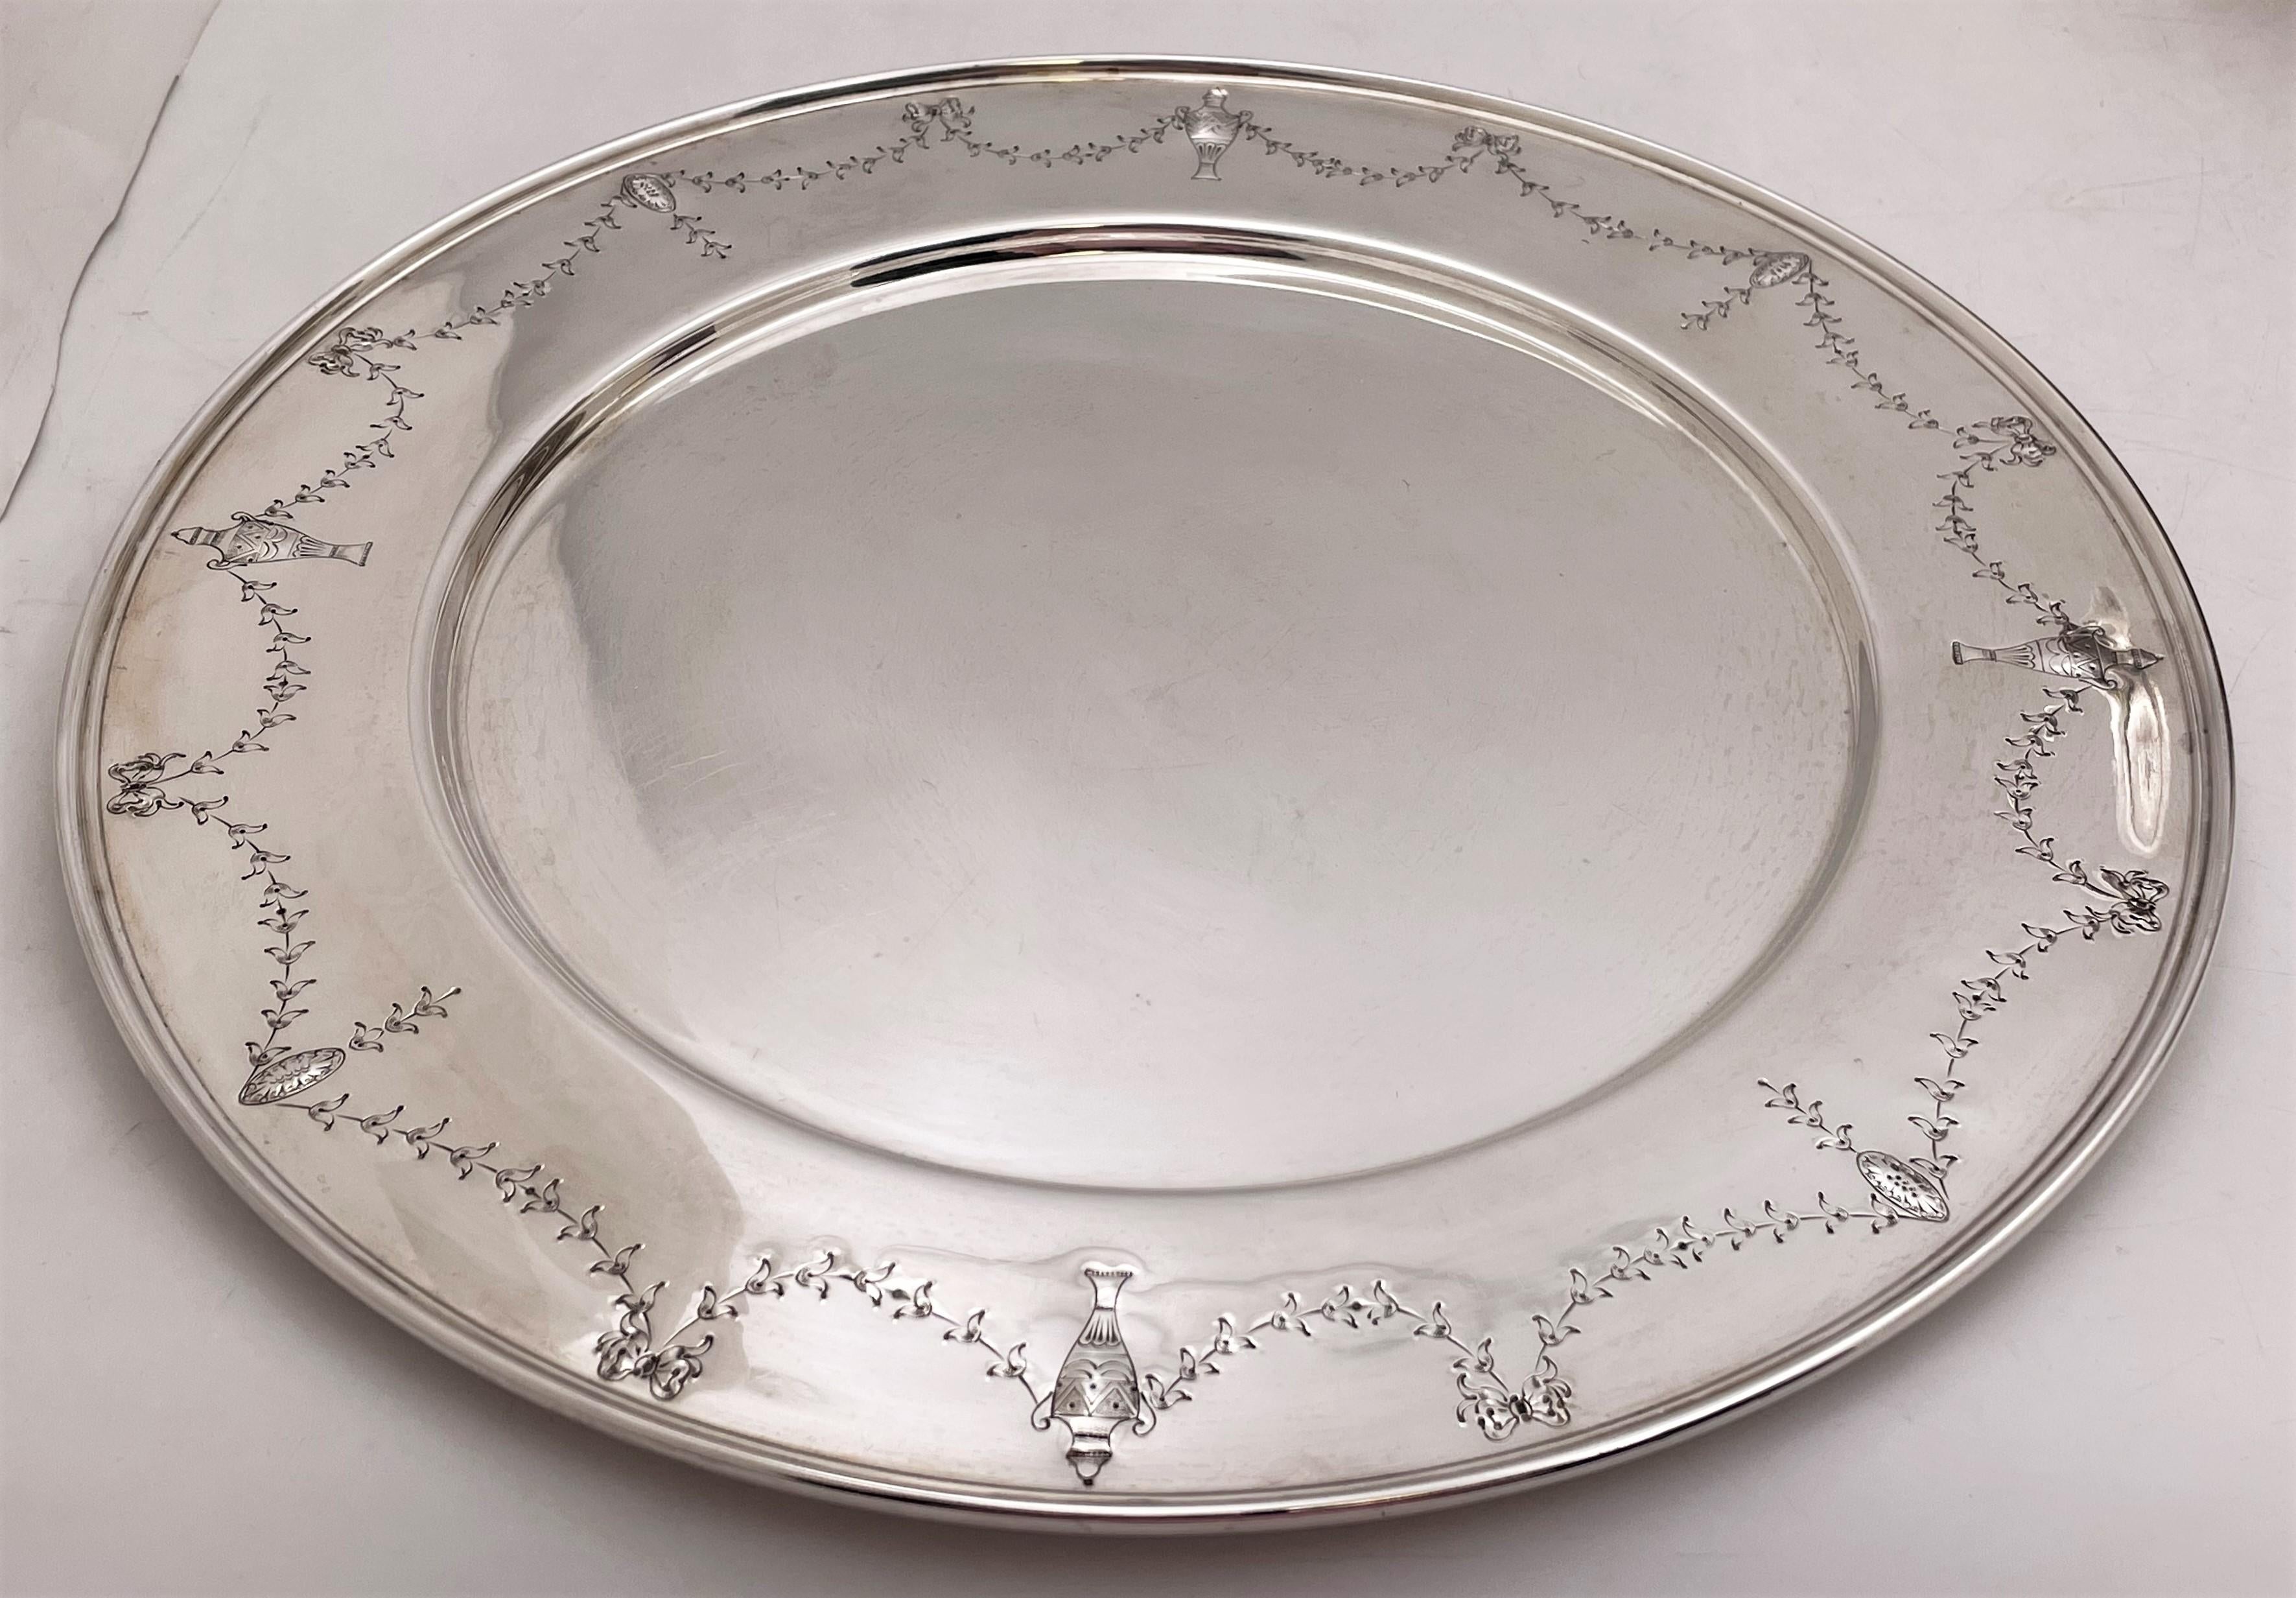 International Sterling/ Barbour & Co. set of 12 sterling silver dinner plates or chargers in the Orange Blossom pattern number 1319C from the early 20th century. Each measures 12'' in diameter by 3/8'' in height and bears hallmarks as shown. Total